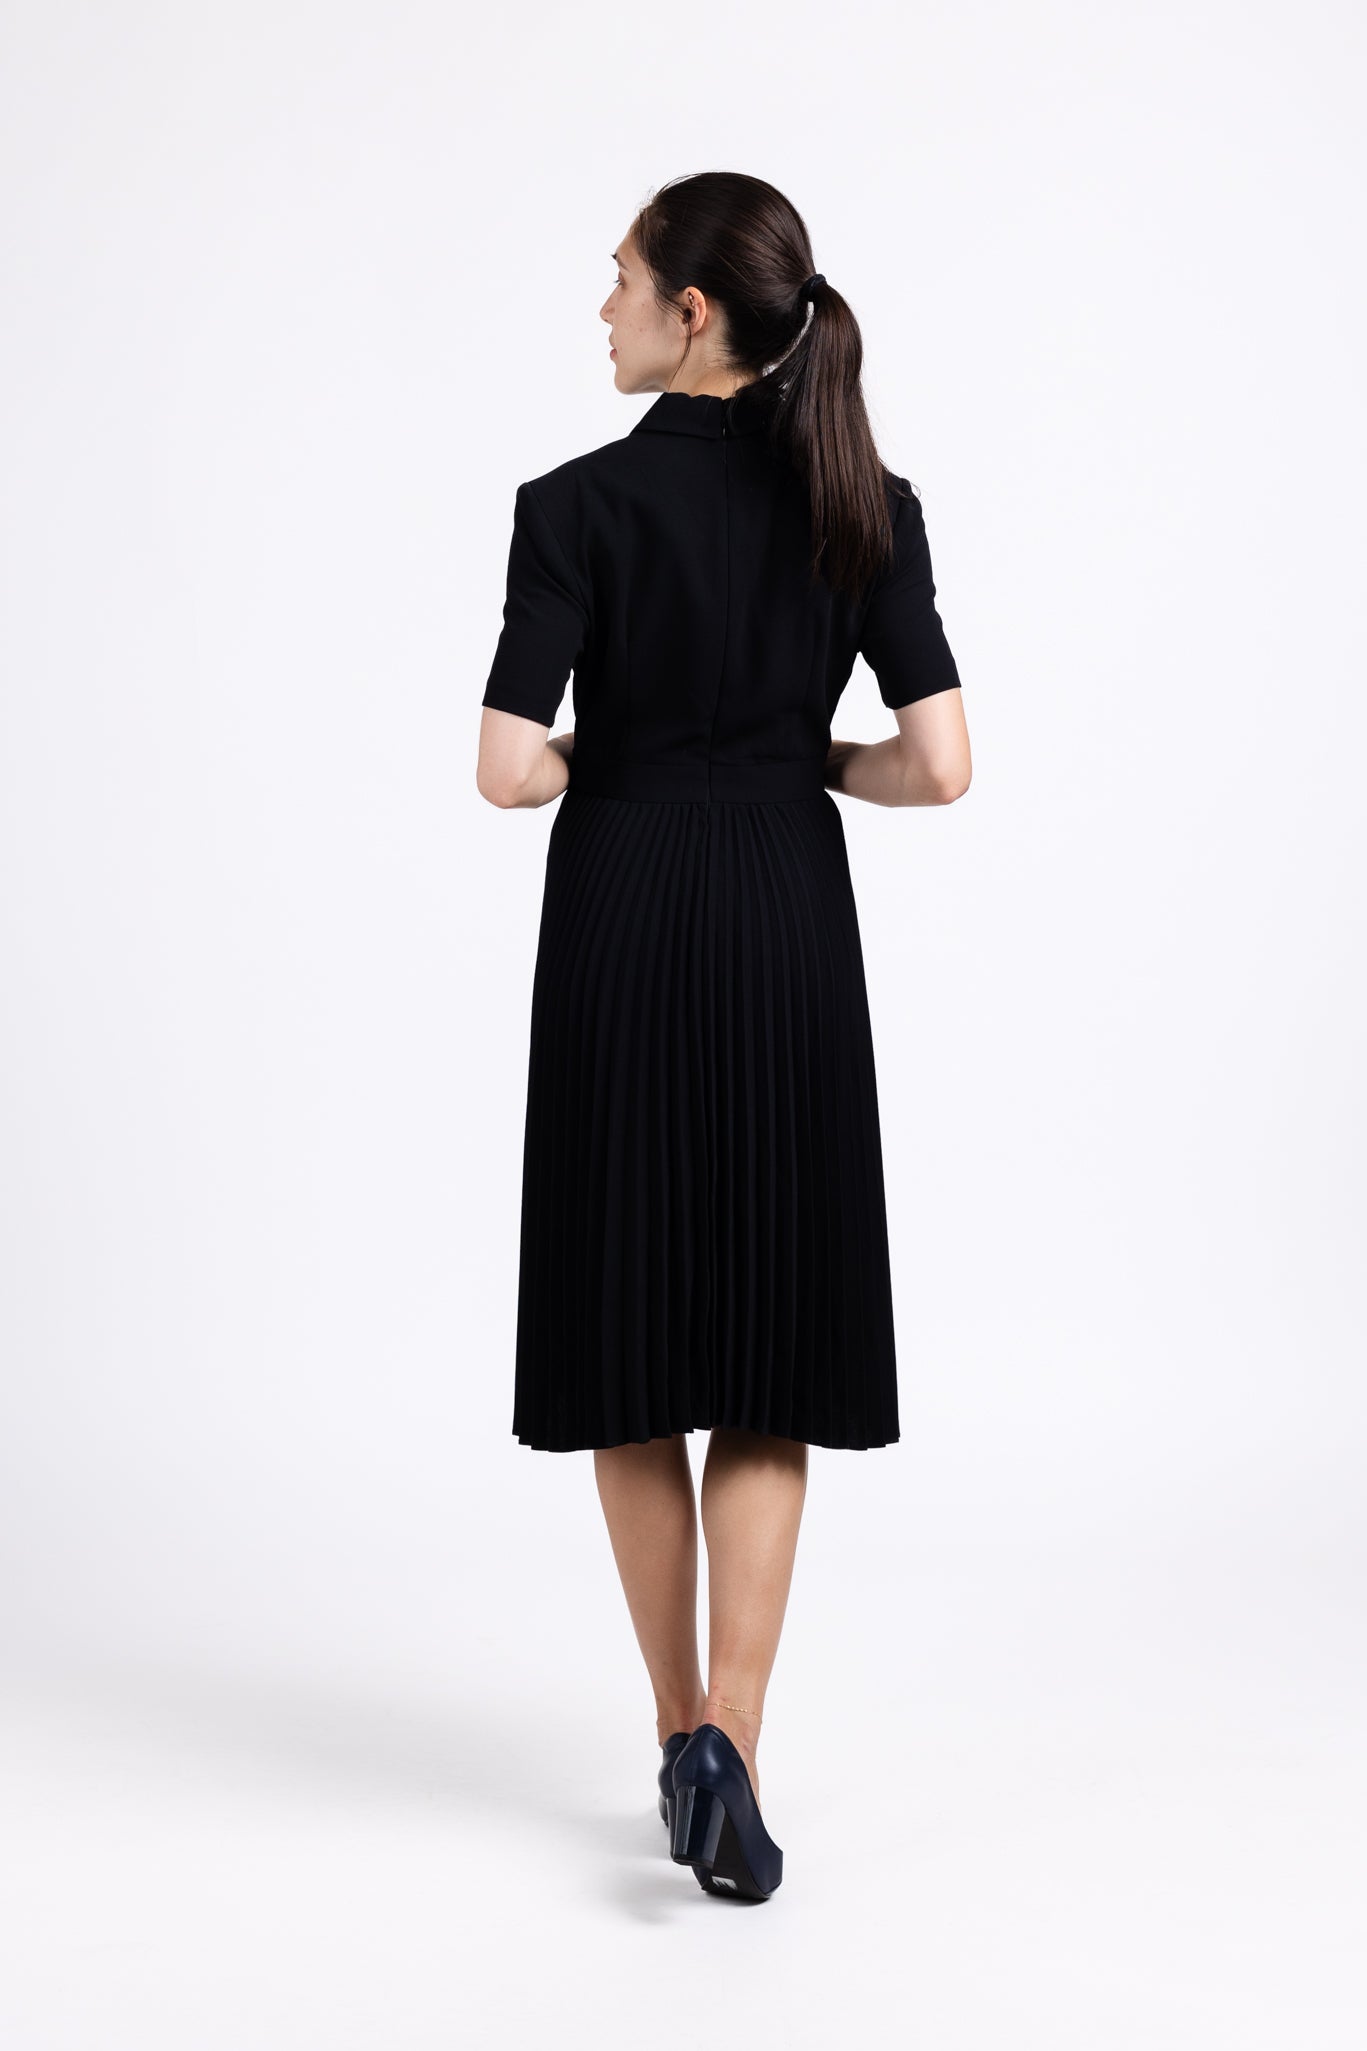 ELEANOR Tailored Belted Shift Dress